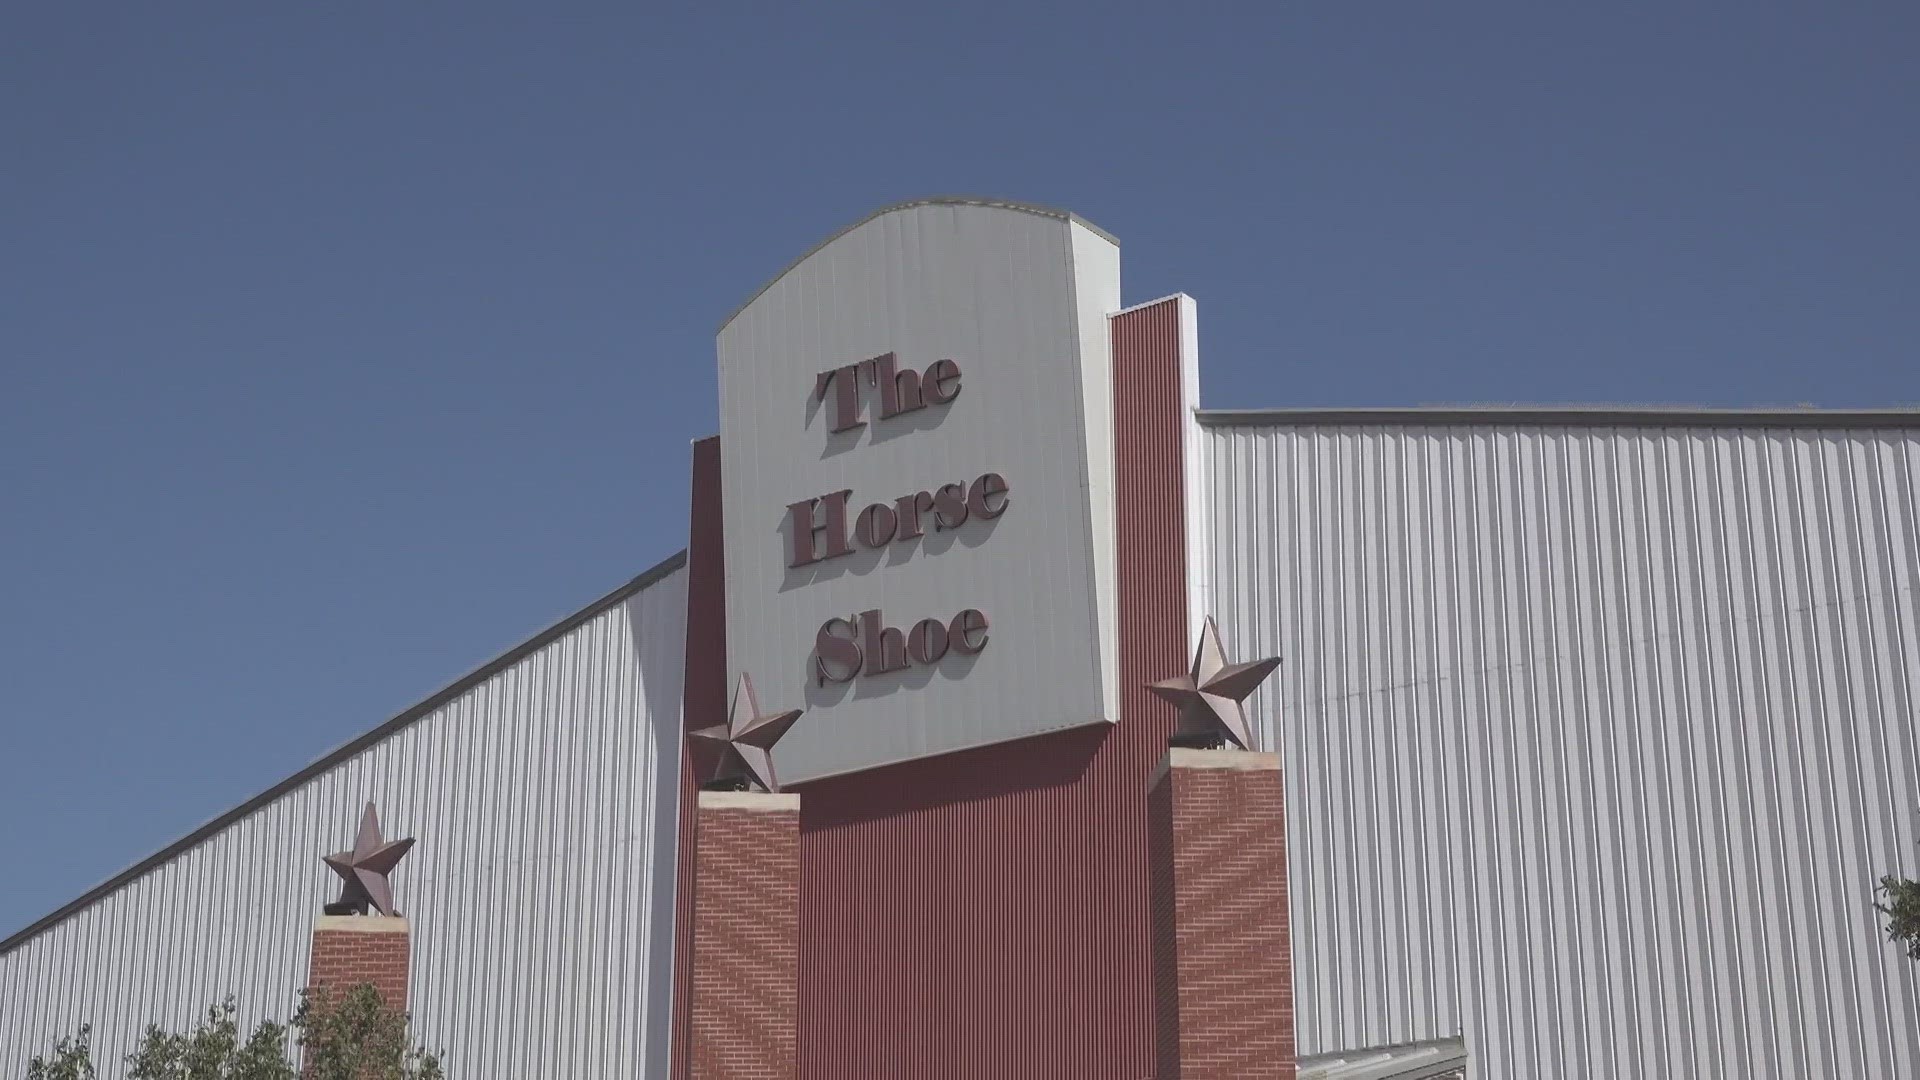 The Horseshoe Arena has a new pricing structure it hopes will attract more guests and events. After a summer of transition, this is one of the final adjustments.